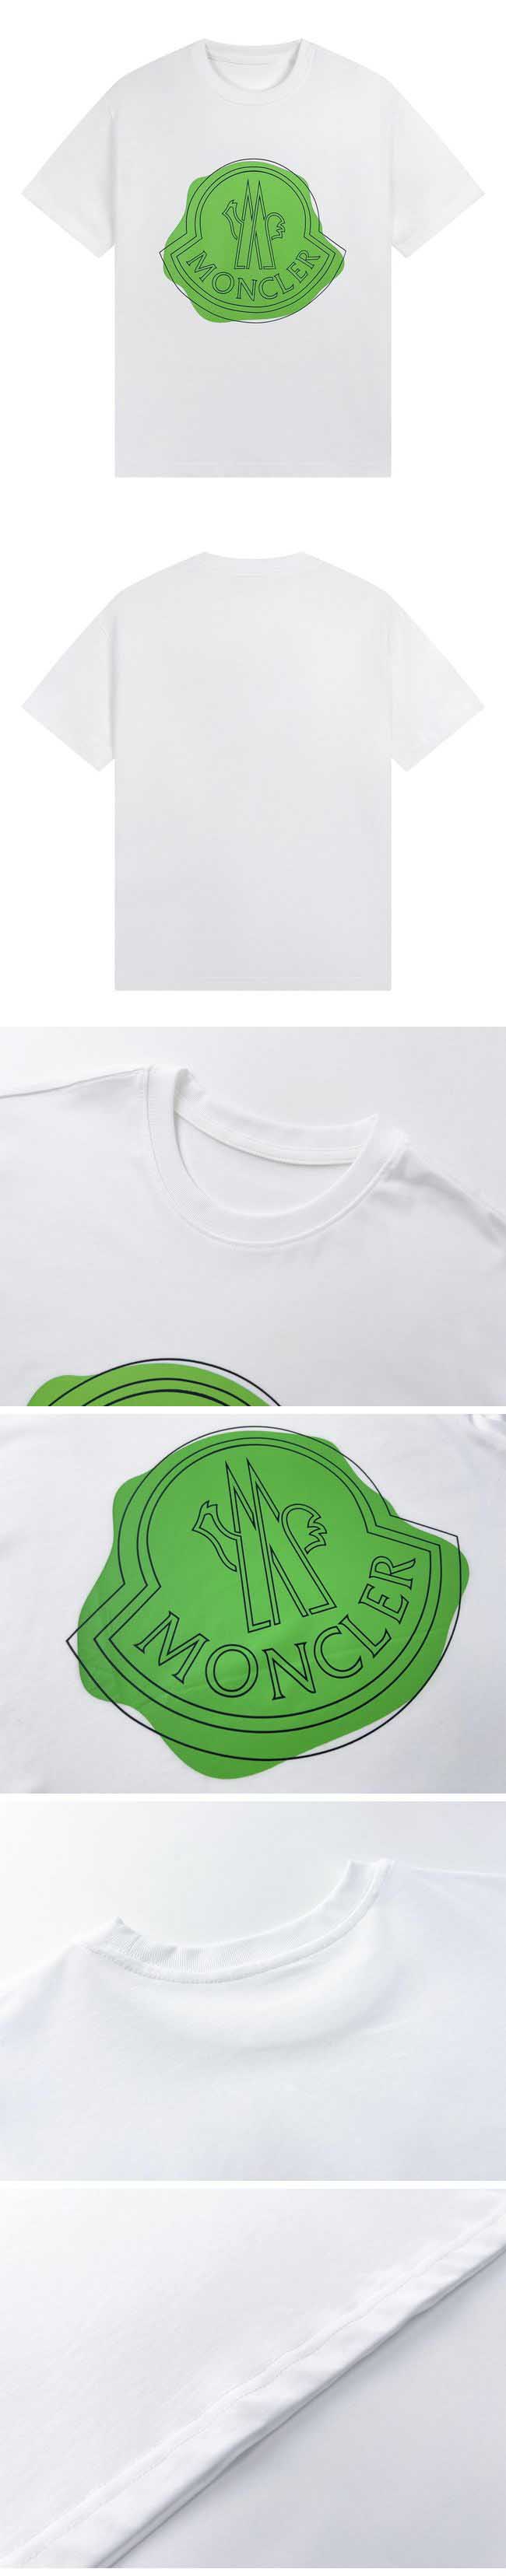 Moncler Green Paint Print Tee モンクレール グリーン ペイント プリント Tシャツ ホワイト